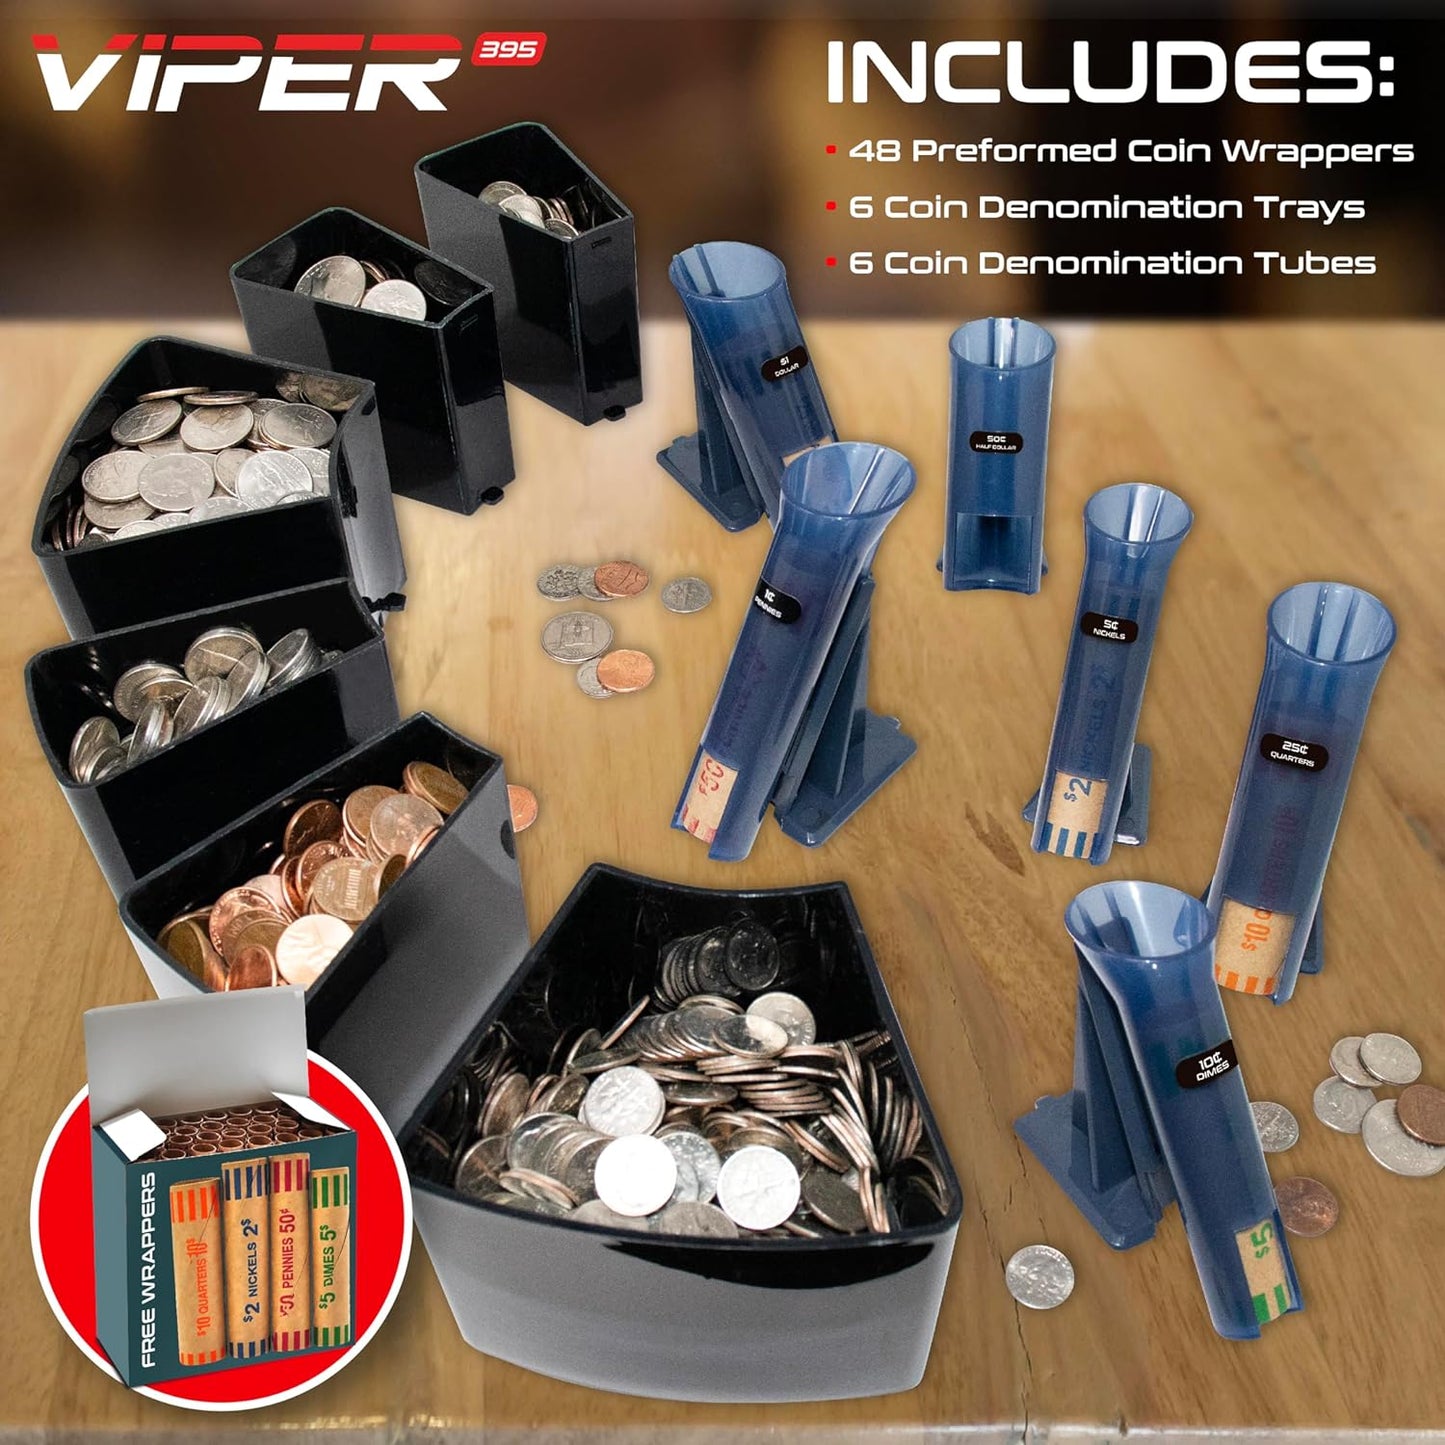 Safetech Viper V395 Coin Counter, Sorter, and Wrapper, Sorts All US Coins Including Half Dollars, Comes with 48 Preformed Wrappers, Dust Cover